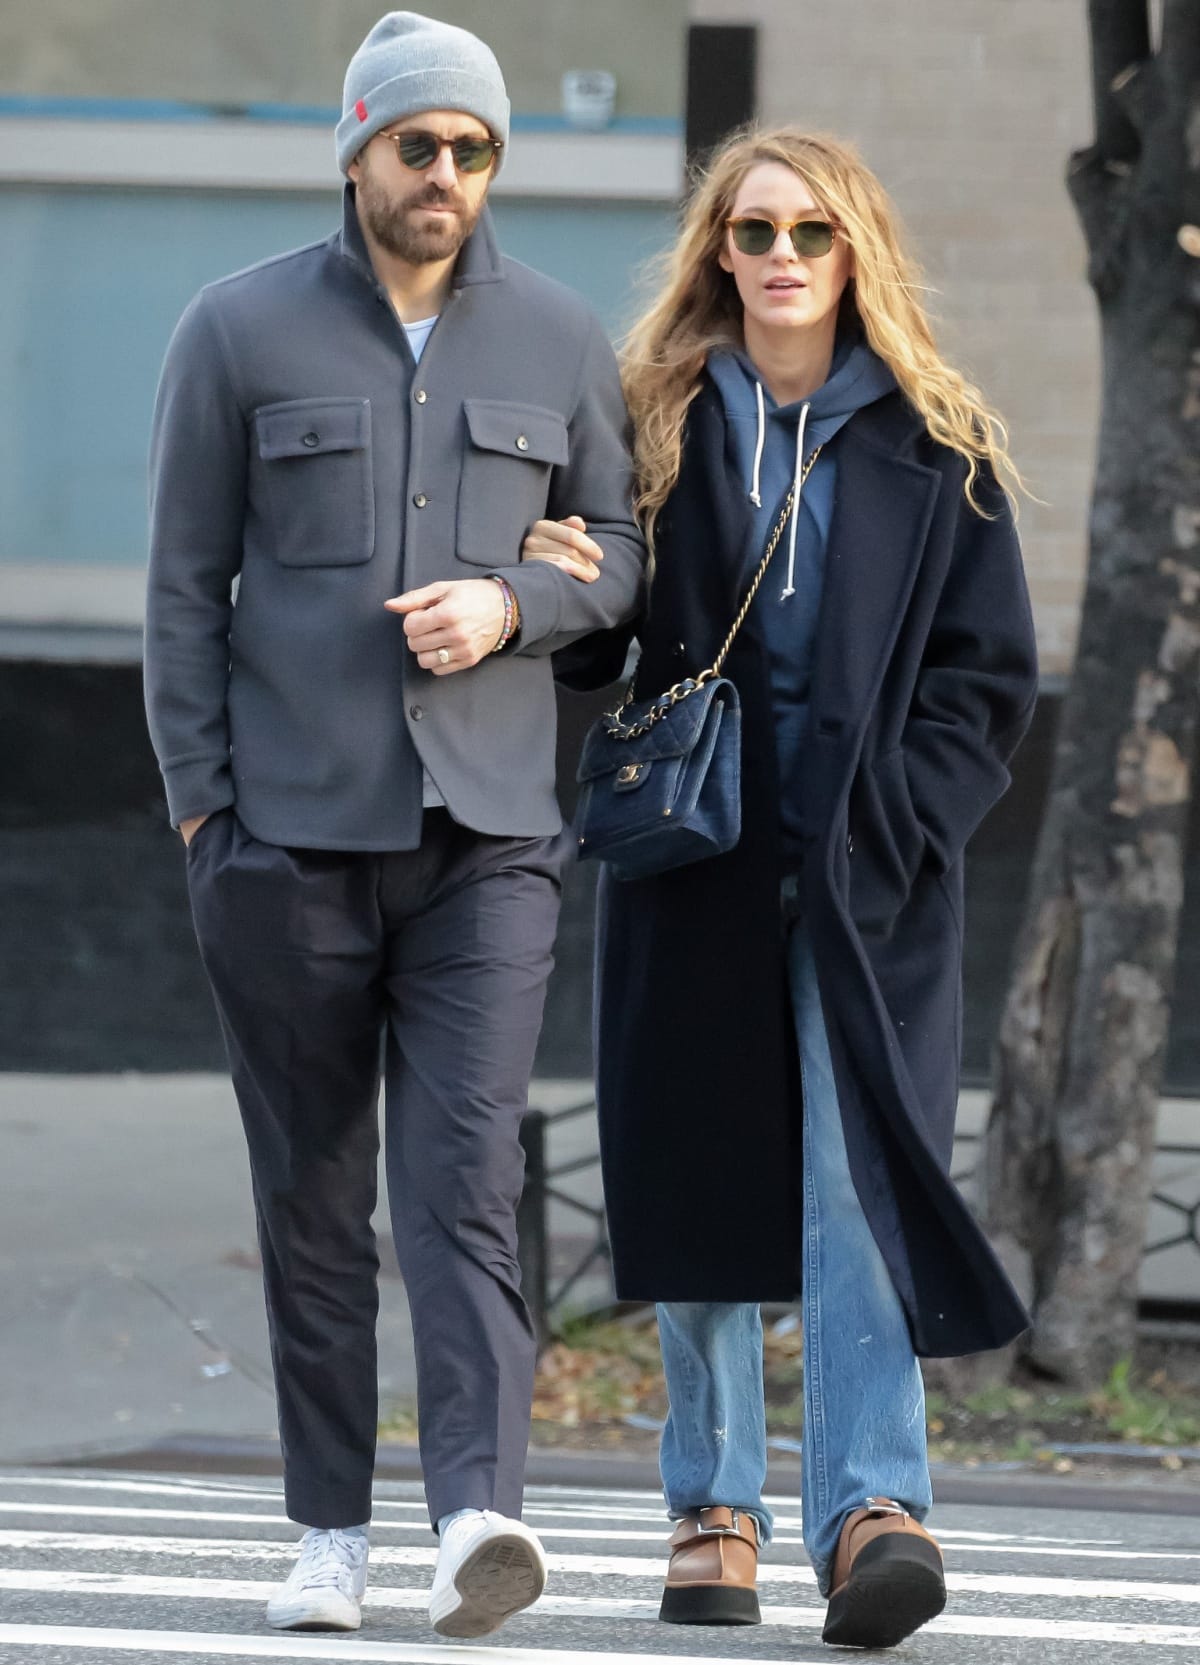 Ryan Reynolds and Blake Lively in coordinating ensembles while out and about in New York City